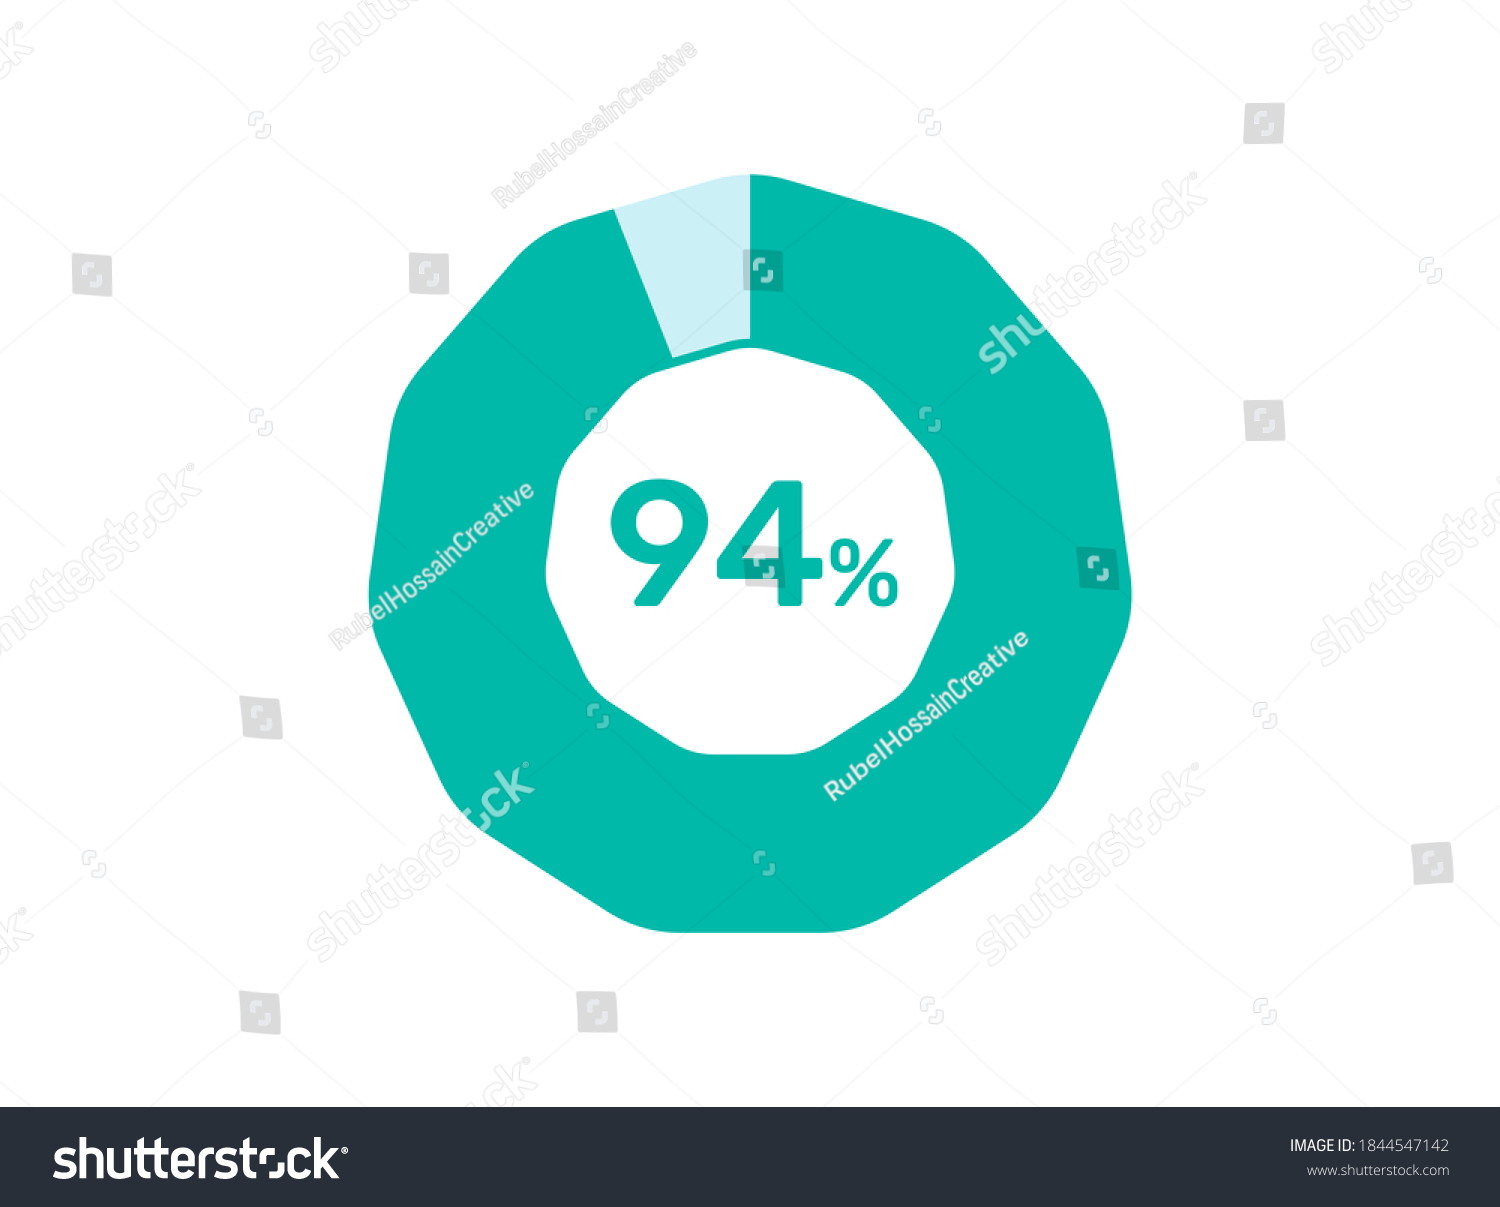 SVG of 94% Percentage, Circle Pie Chart showing 94% Percentage diagram infographic for  UI, web Design svg